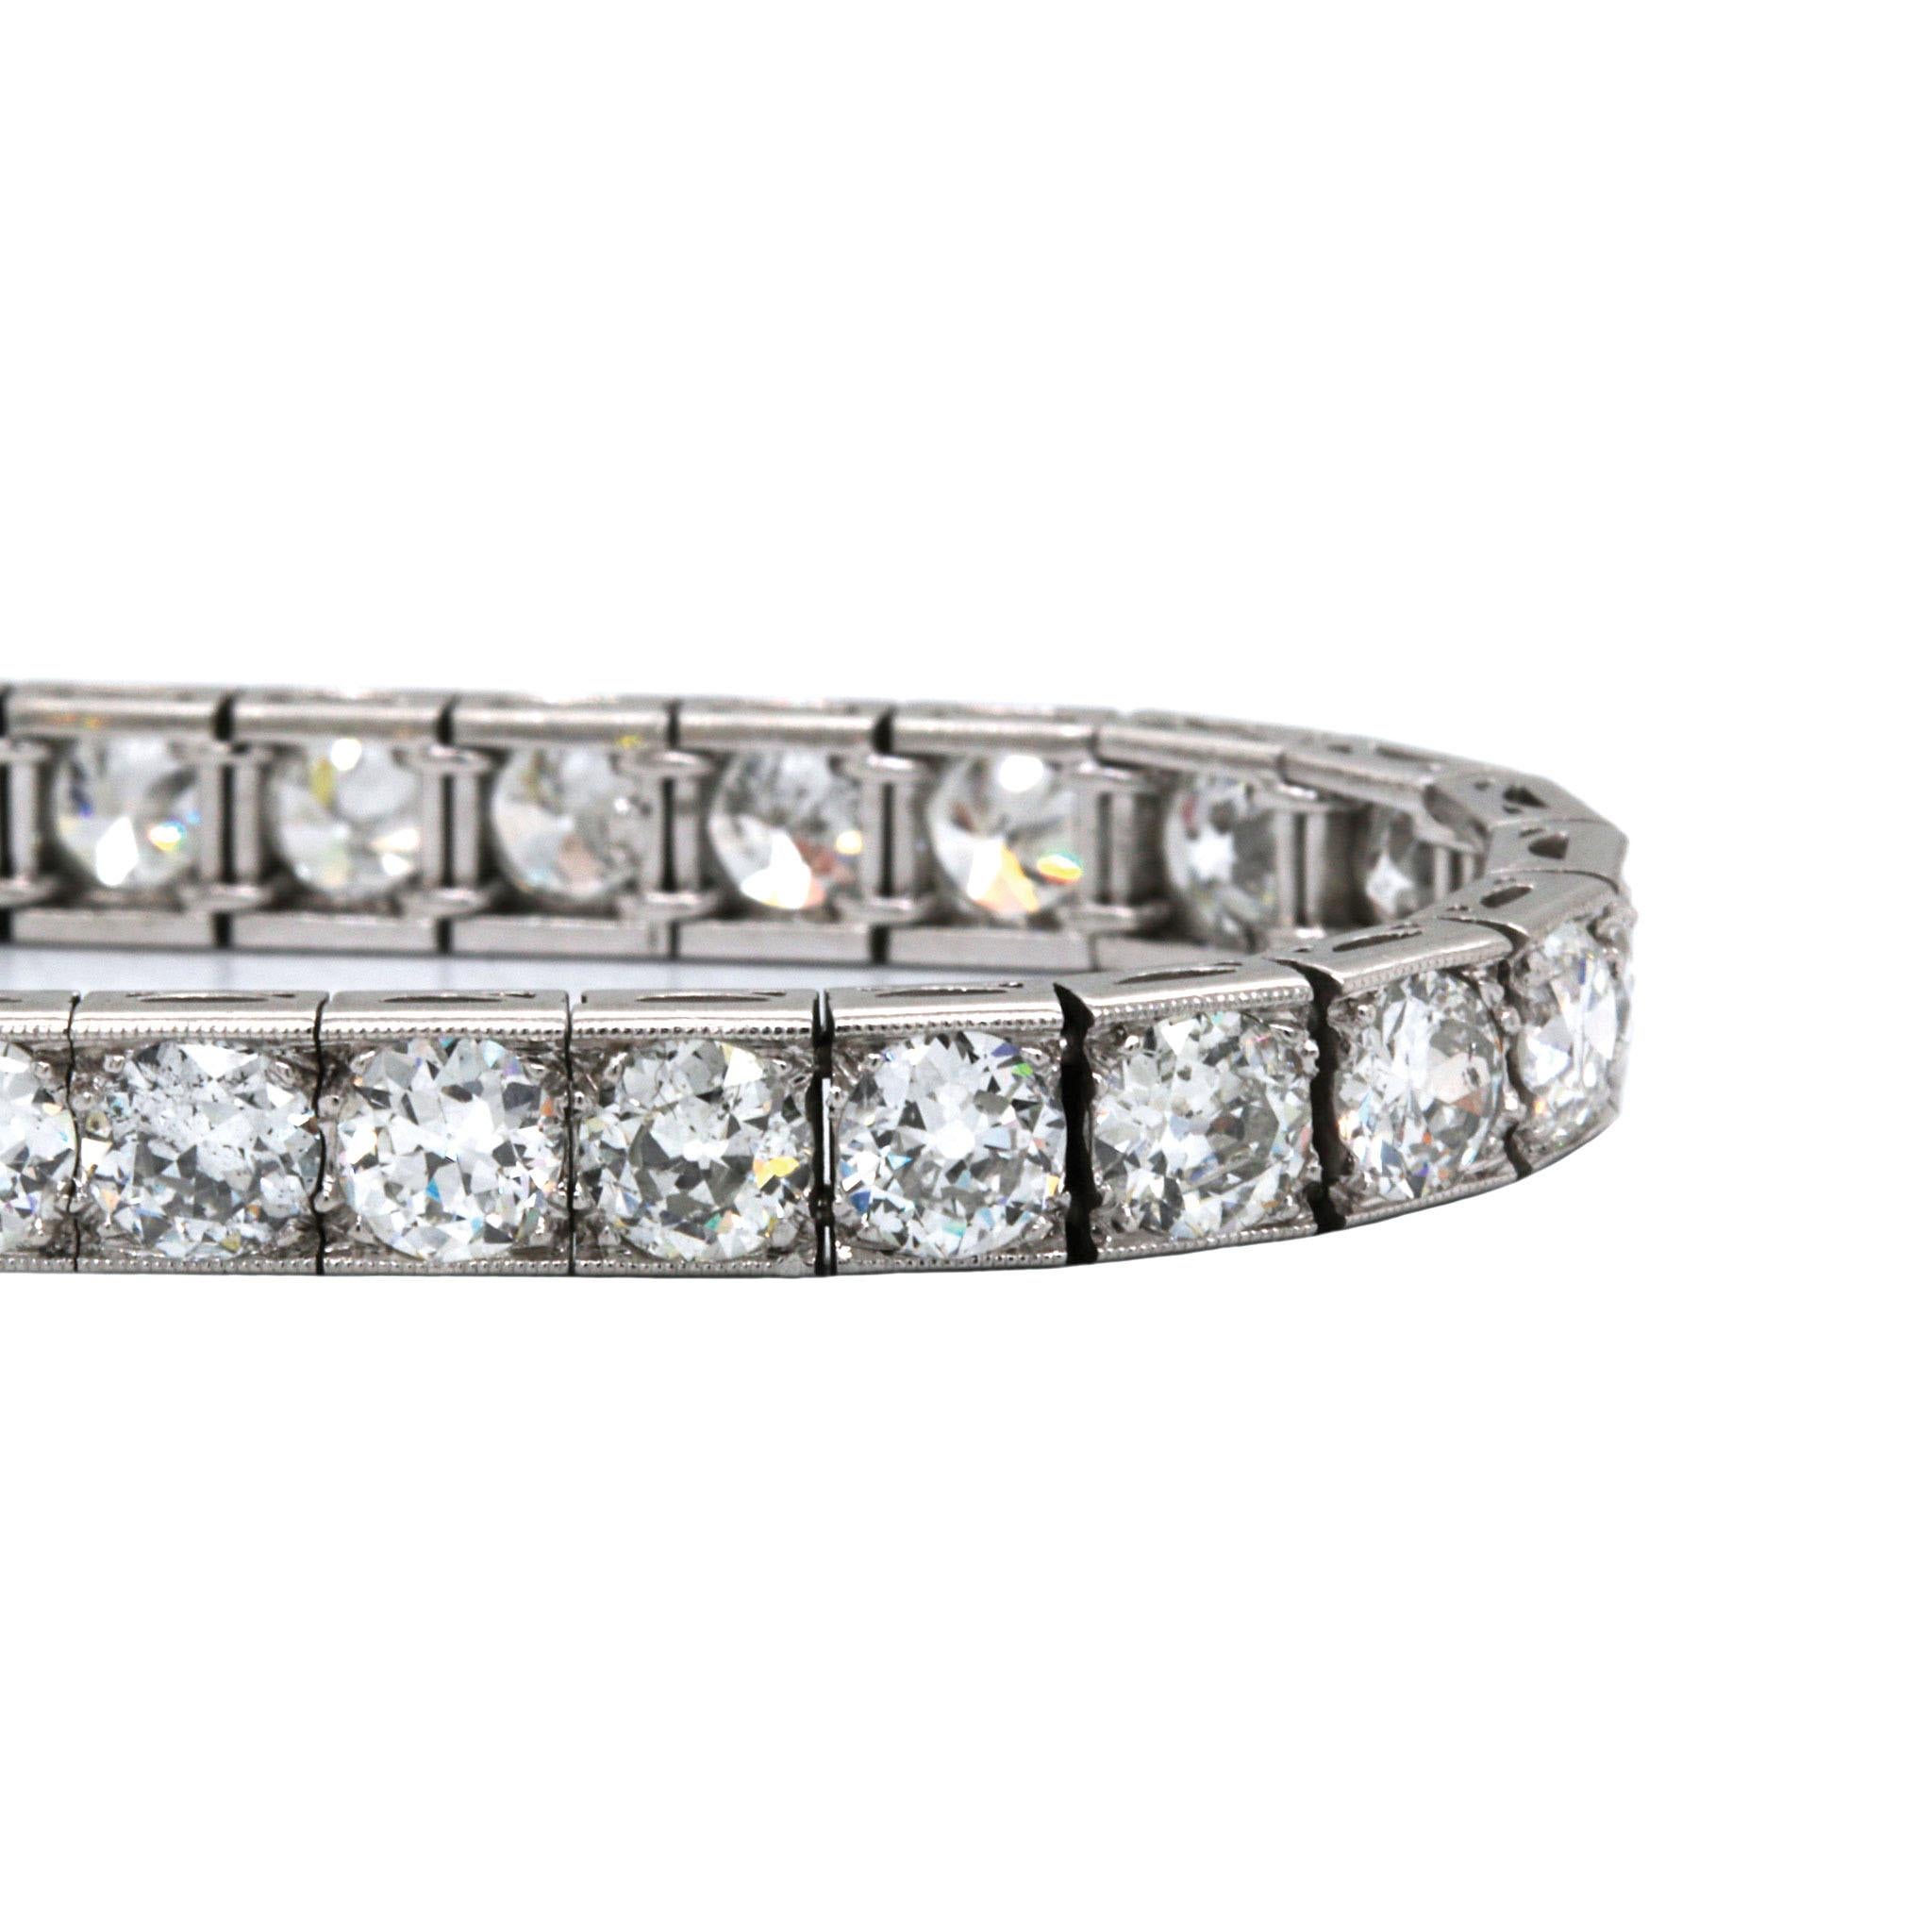 This sumptuous diamond bracelet features 9.54ctw of sparkling vintage Old European Cut diamonds; graded H-J in color, I1-VS2 in clarity. Set in platinum, the bracelet fastens securely via a push style clasp, which is further held in place with a